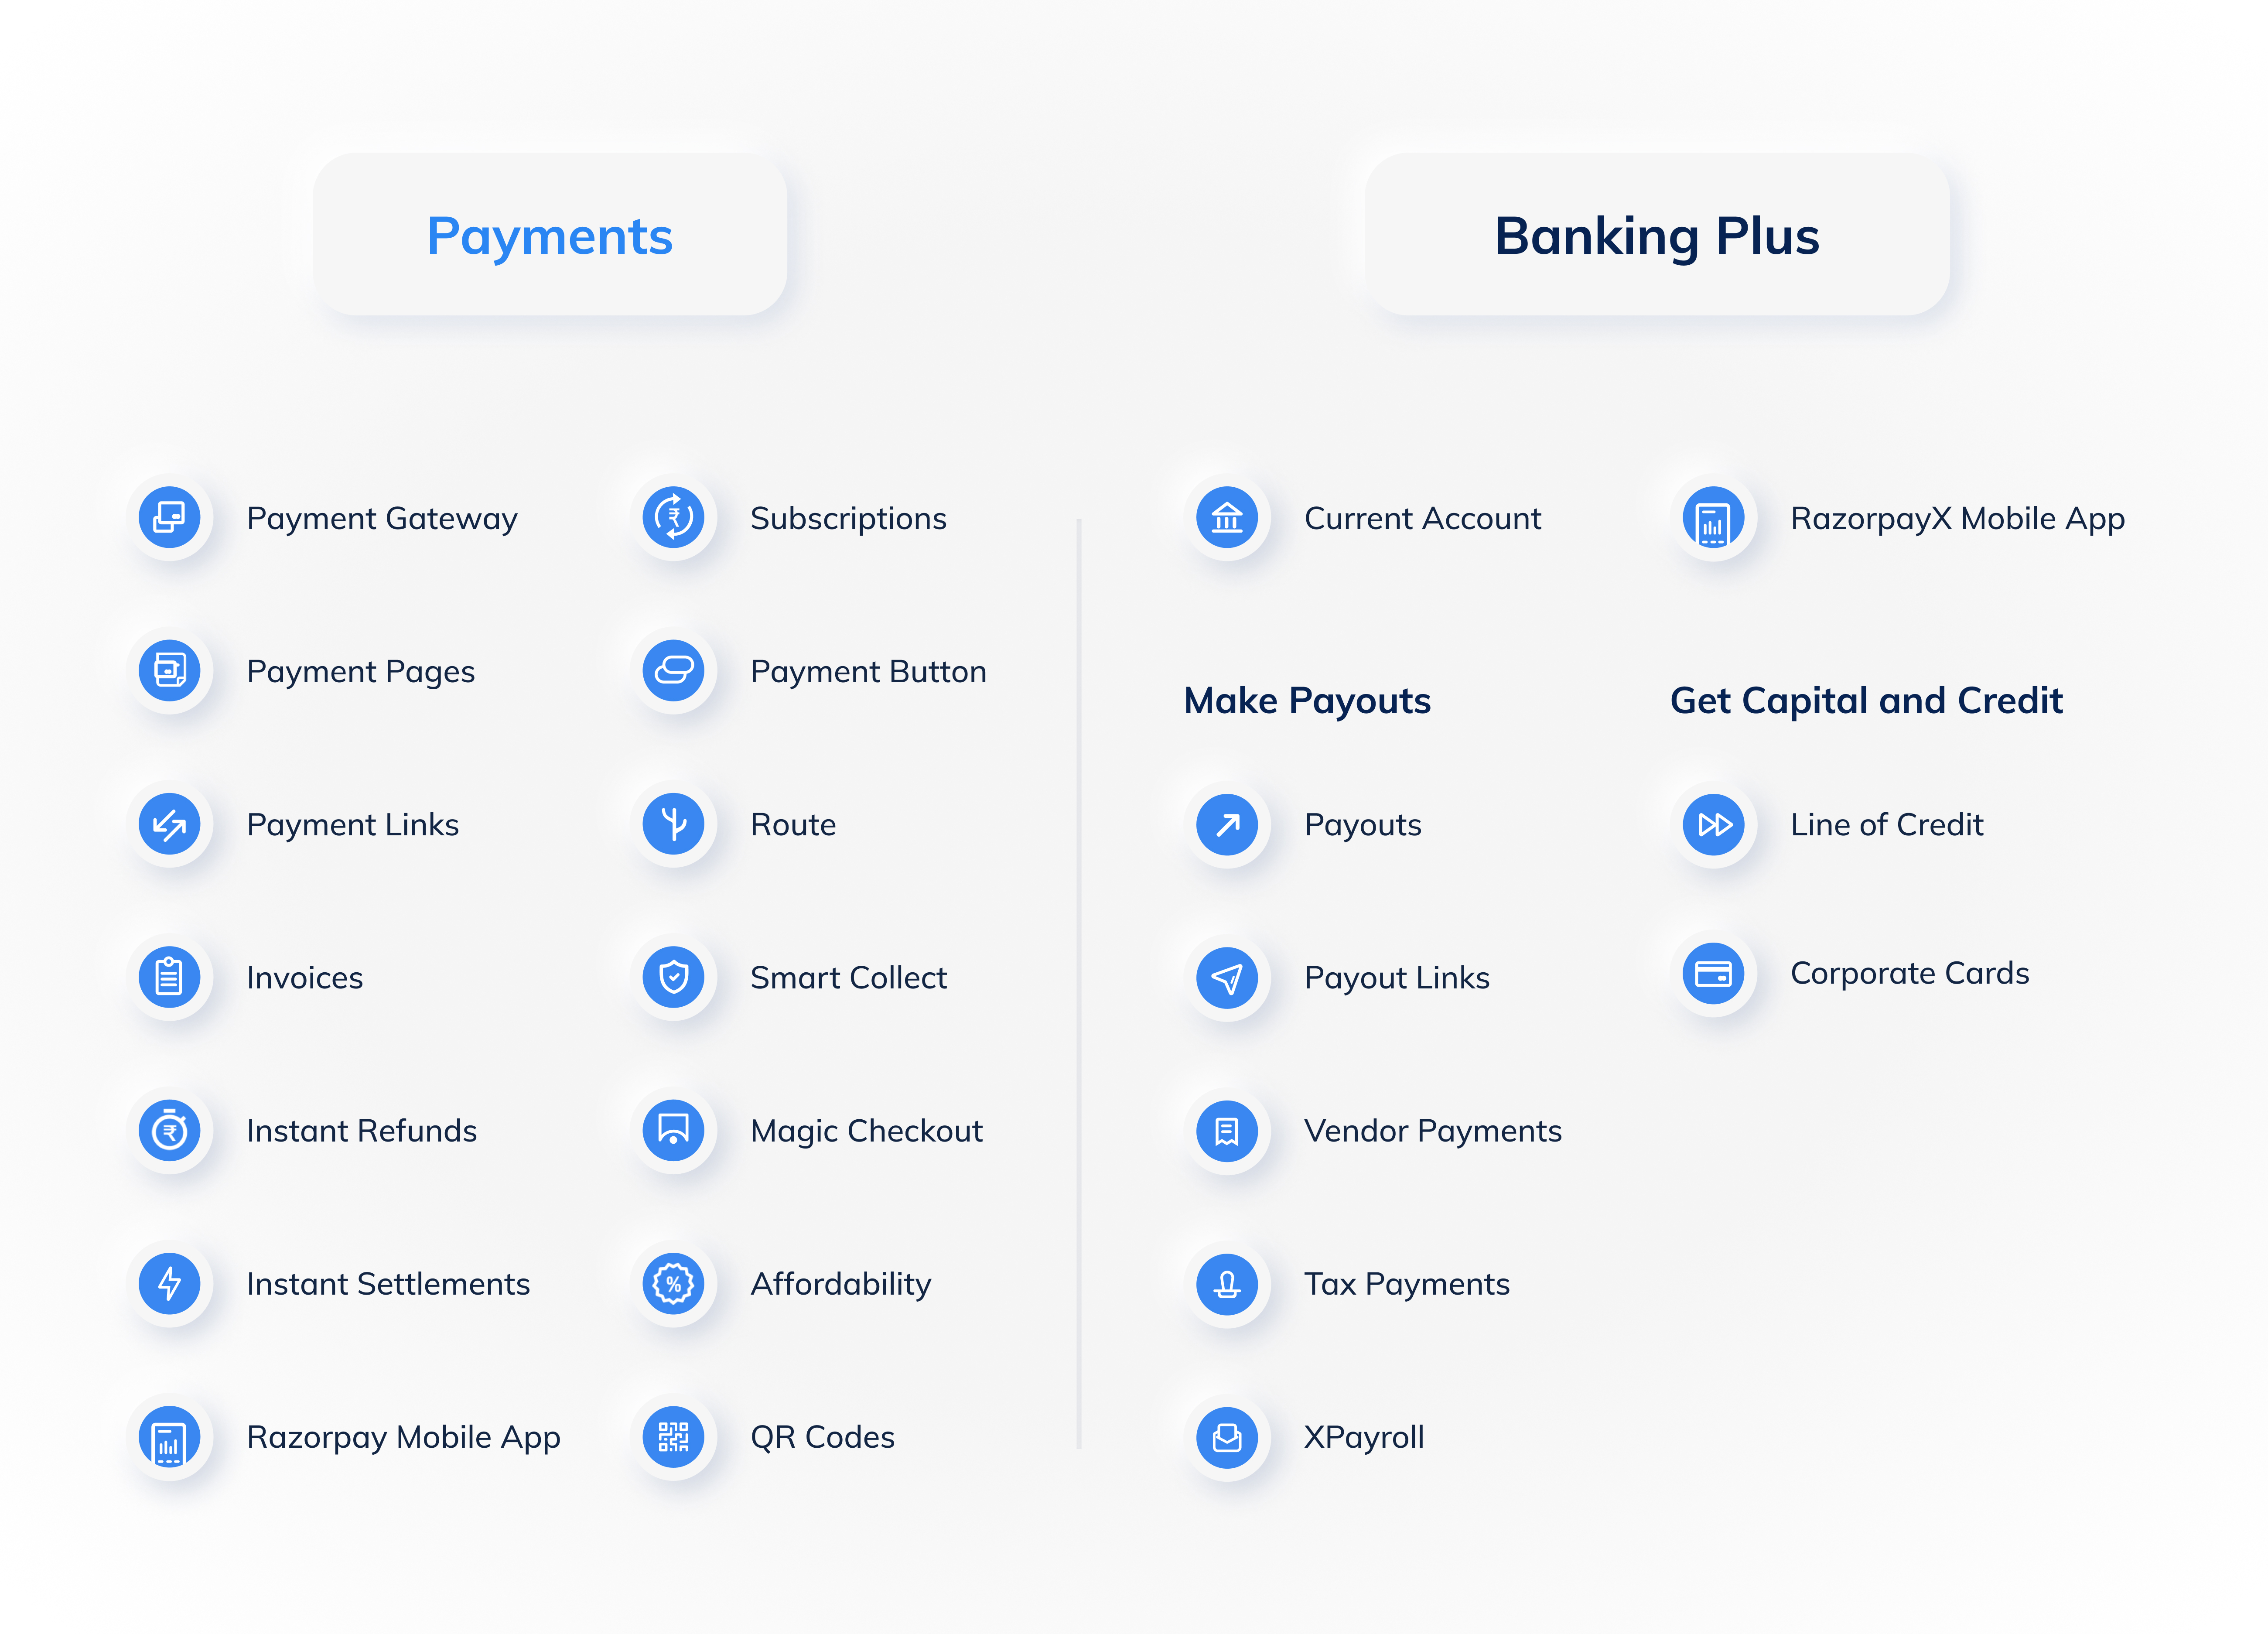 List of products offered by Razorpay